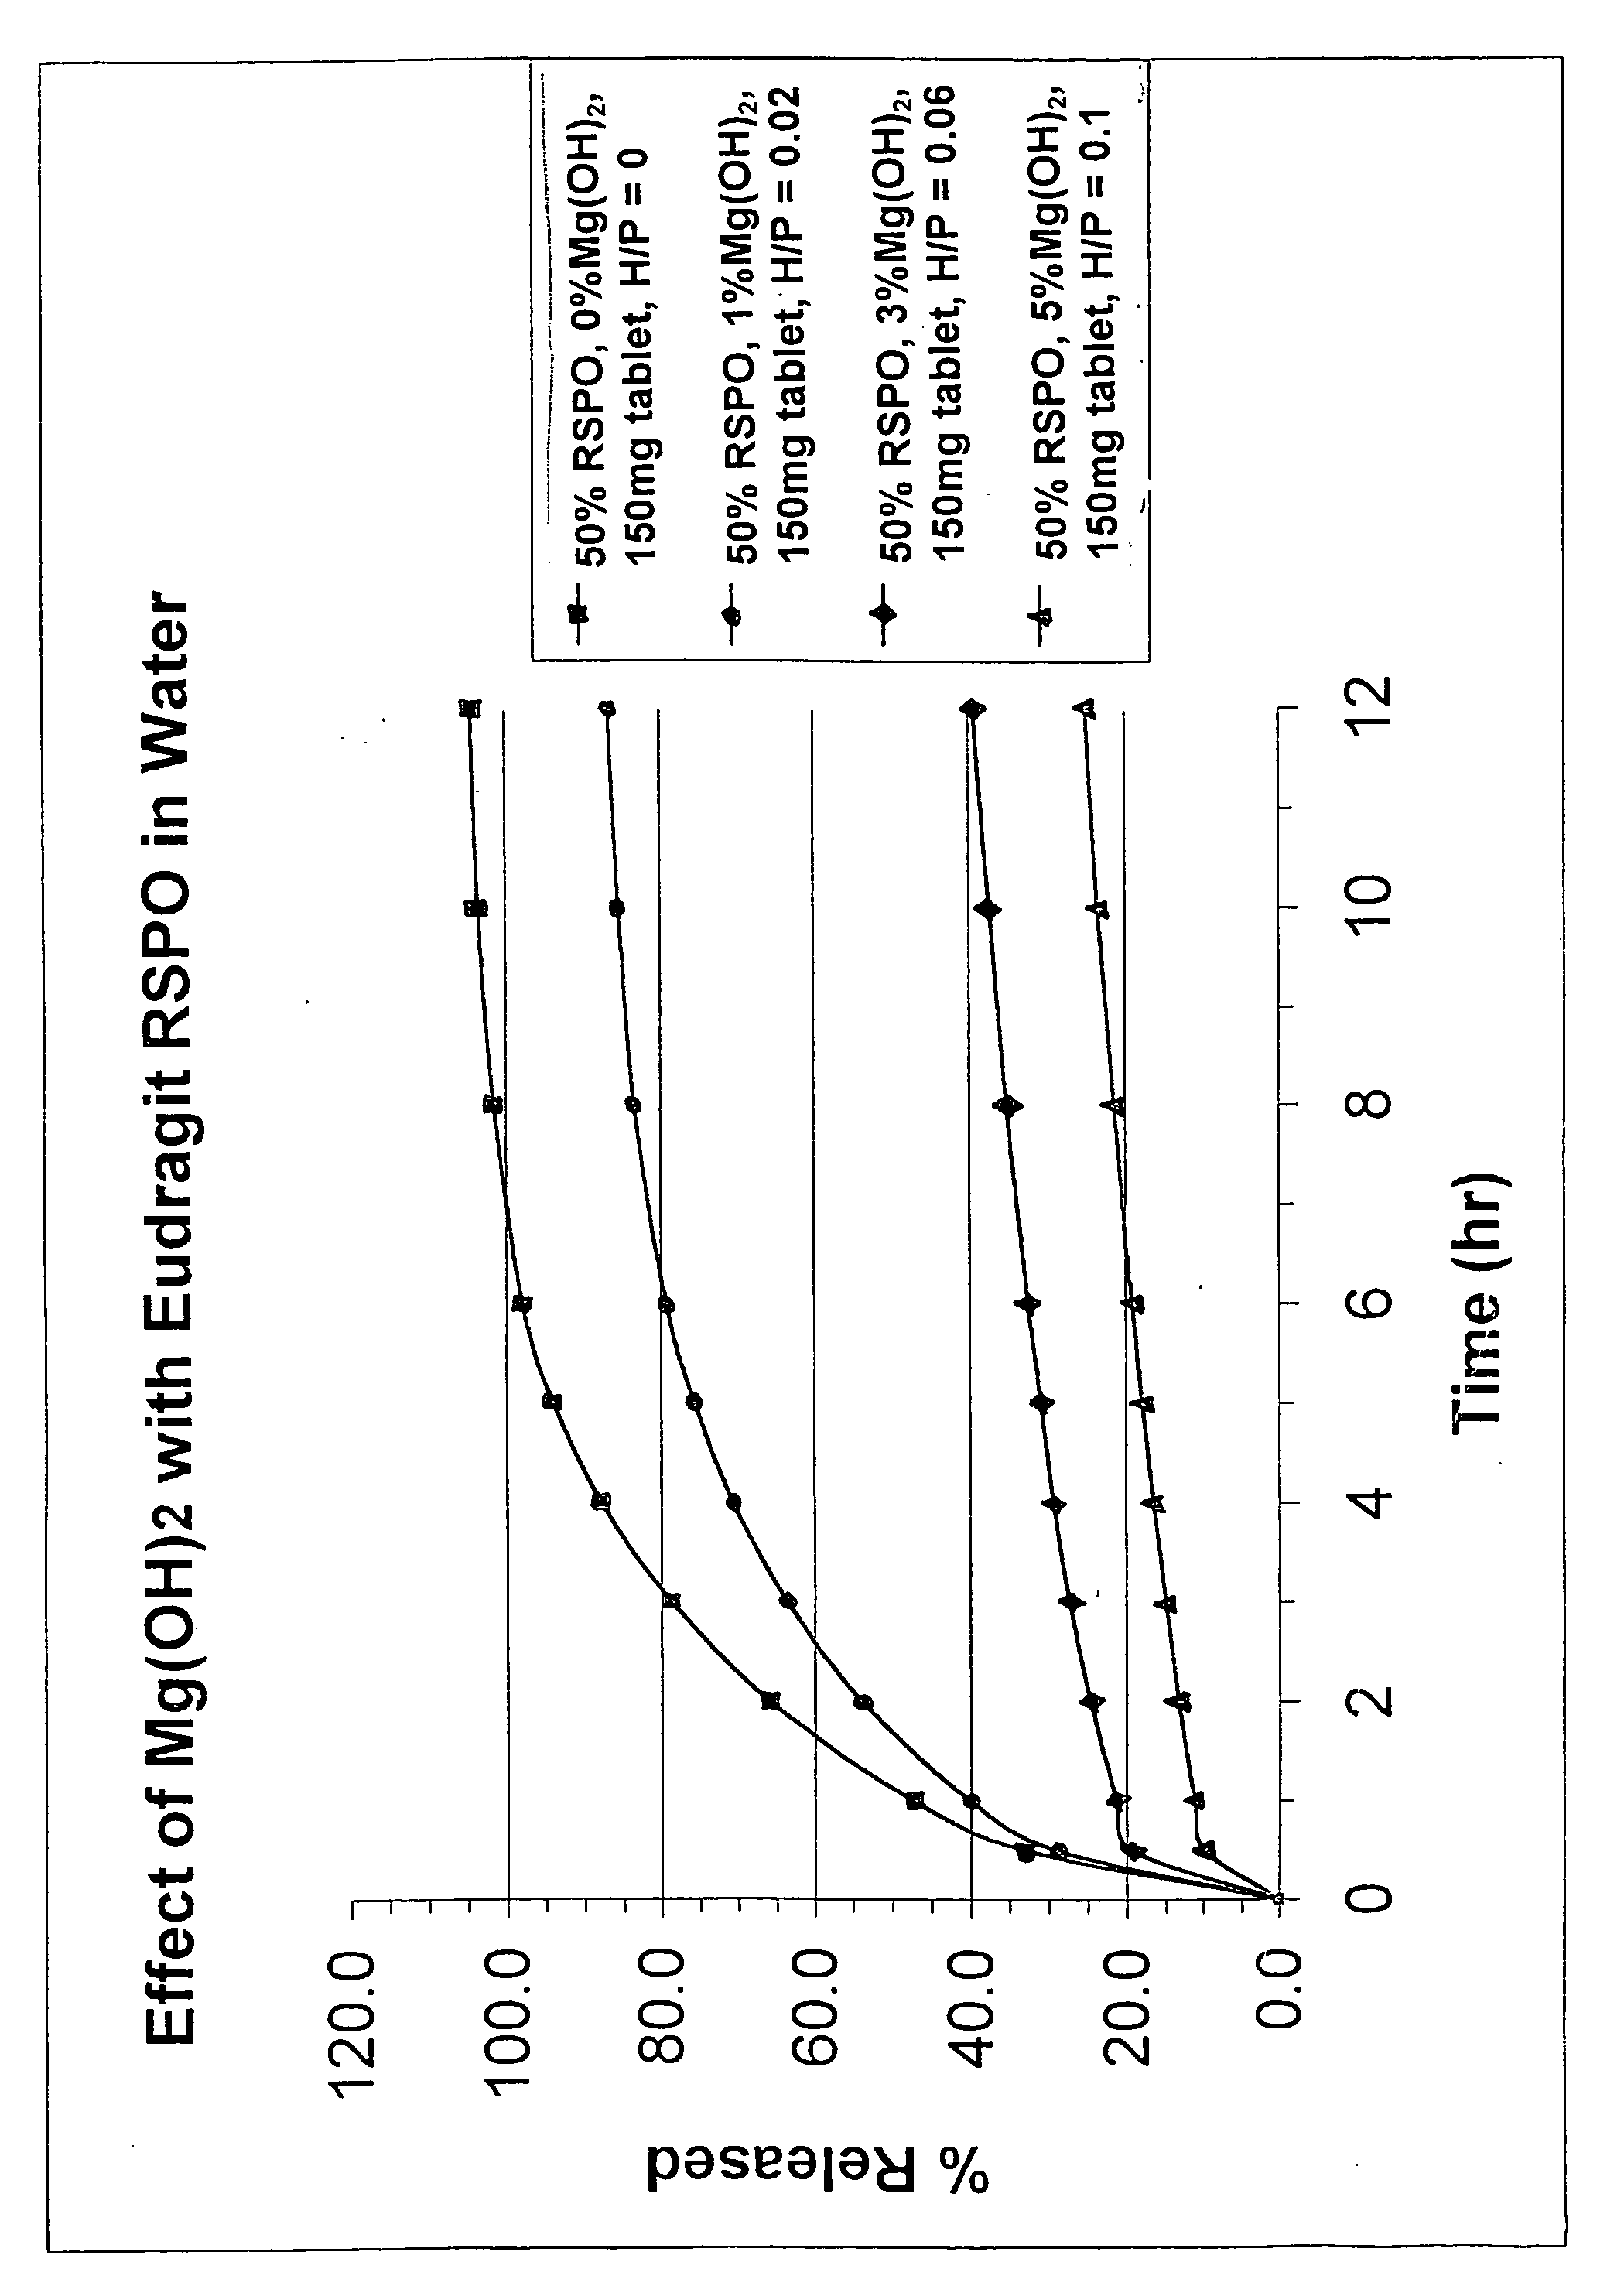 Sustained release oxycodone composition with acrylic polymer and metal hydroxide